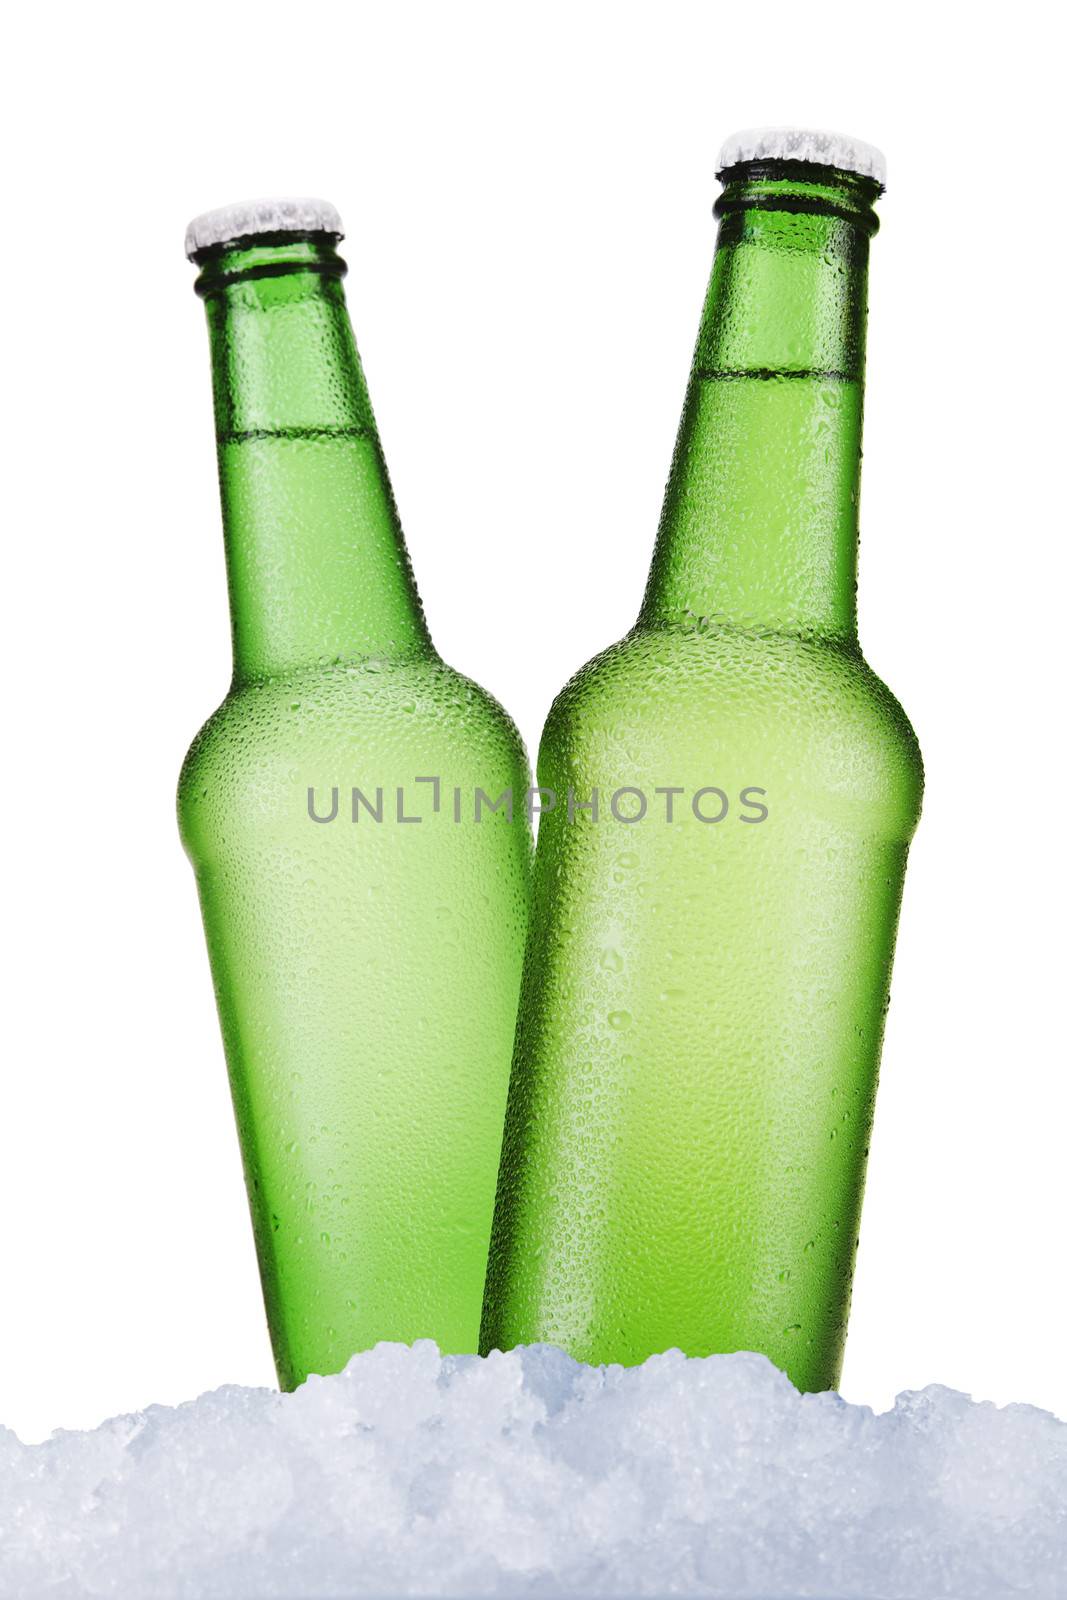 Three green beer bottles sitting on ice over a white background.